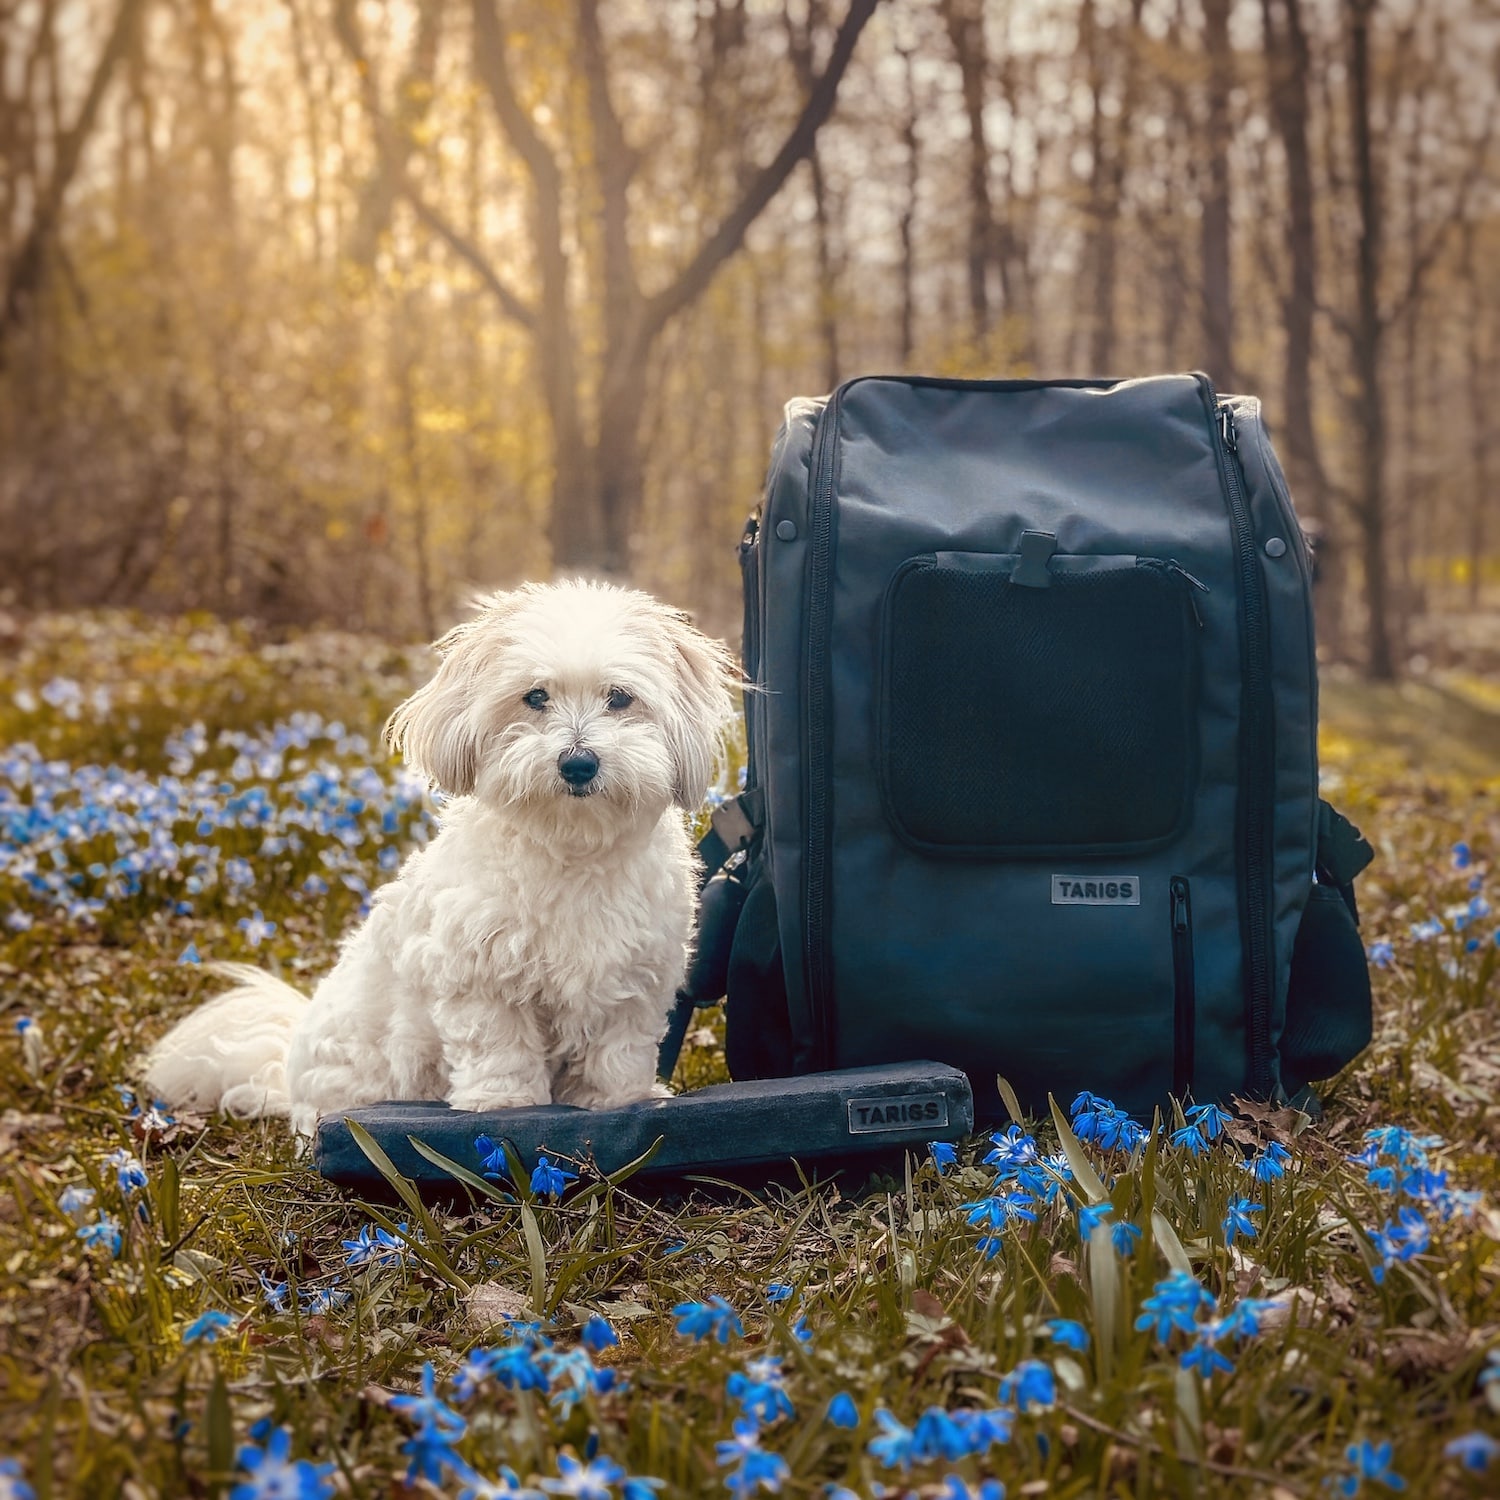 Coton de Tulear sits on Booster Seat for PeakStone Backpack.